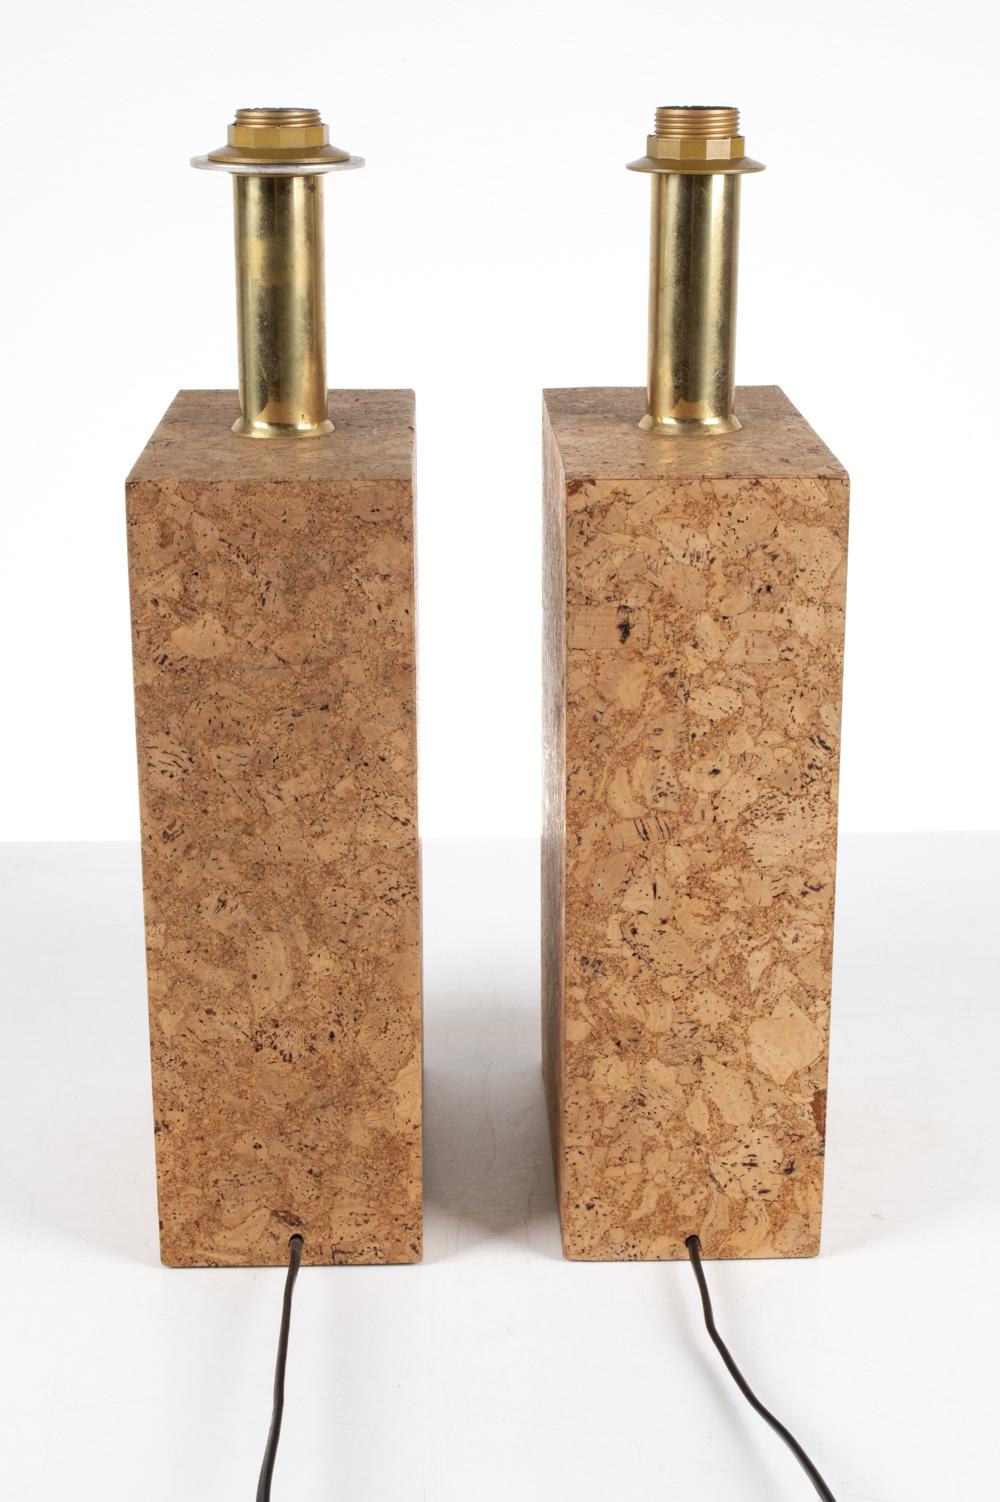 Pair of Cork Monolith Table Lamps in the Stye of Ingo Maurer, c. 1970's For Sale 7